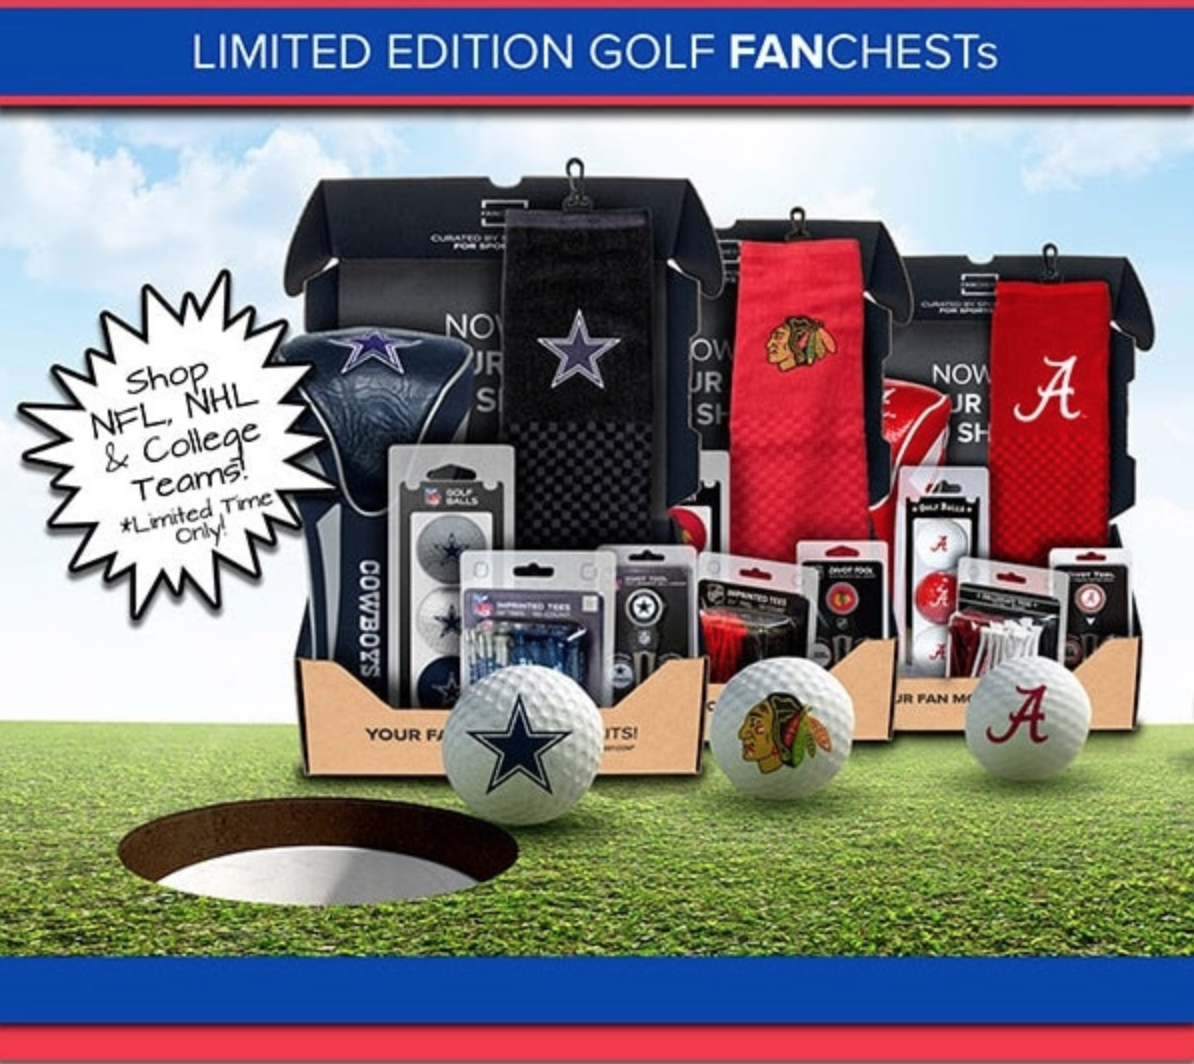 Today Only! Fanchest Flash Sale – $10 off Golf Fanchests!